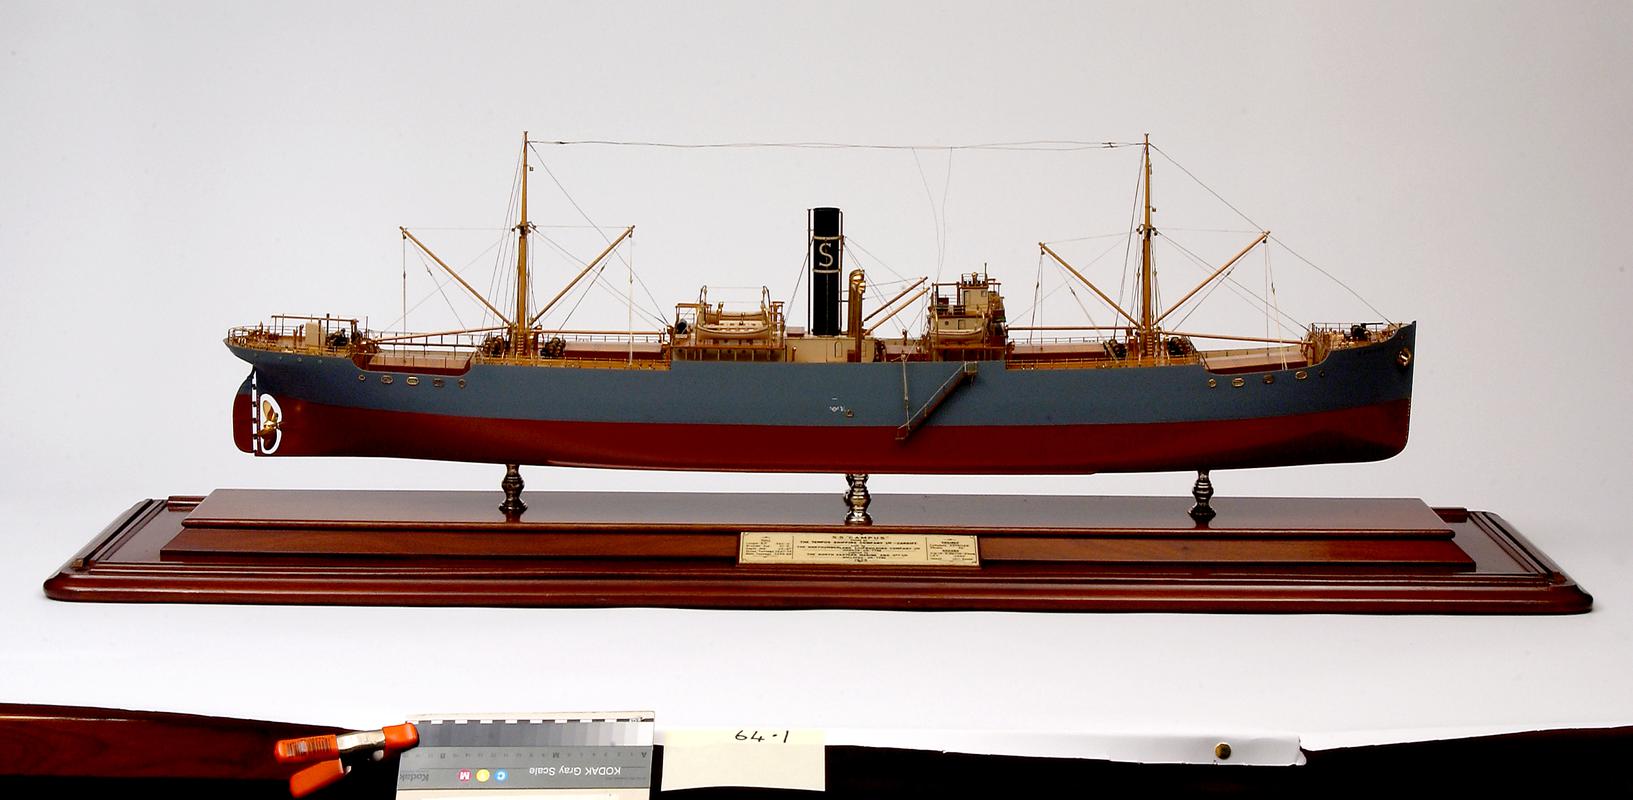 Full hull ship model of the S.S. CAMPUS